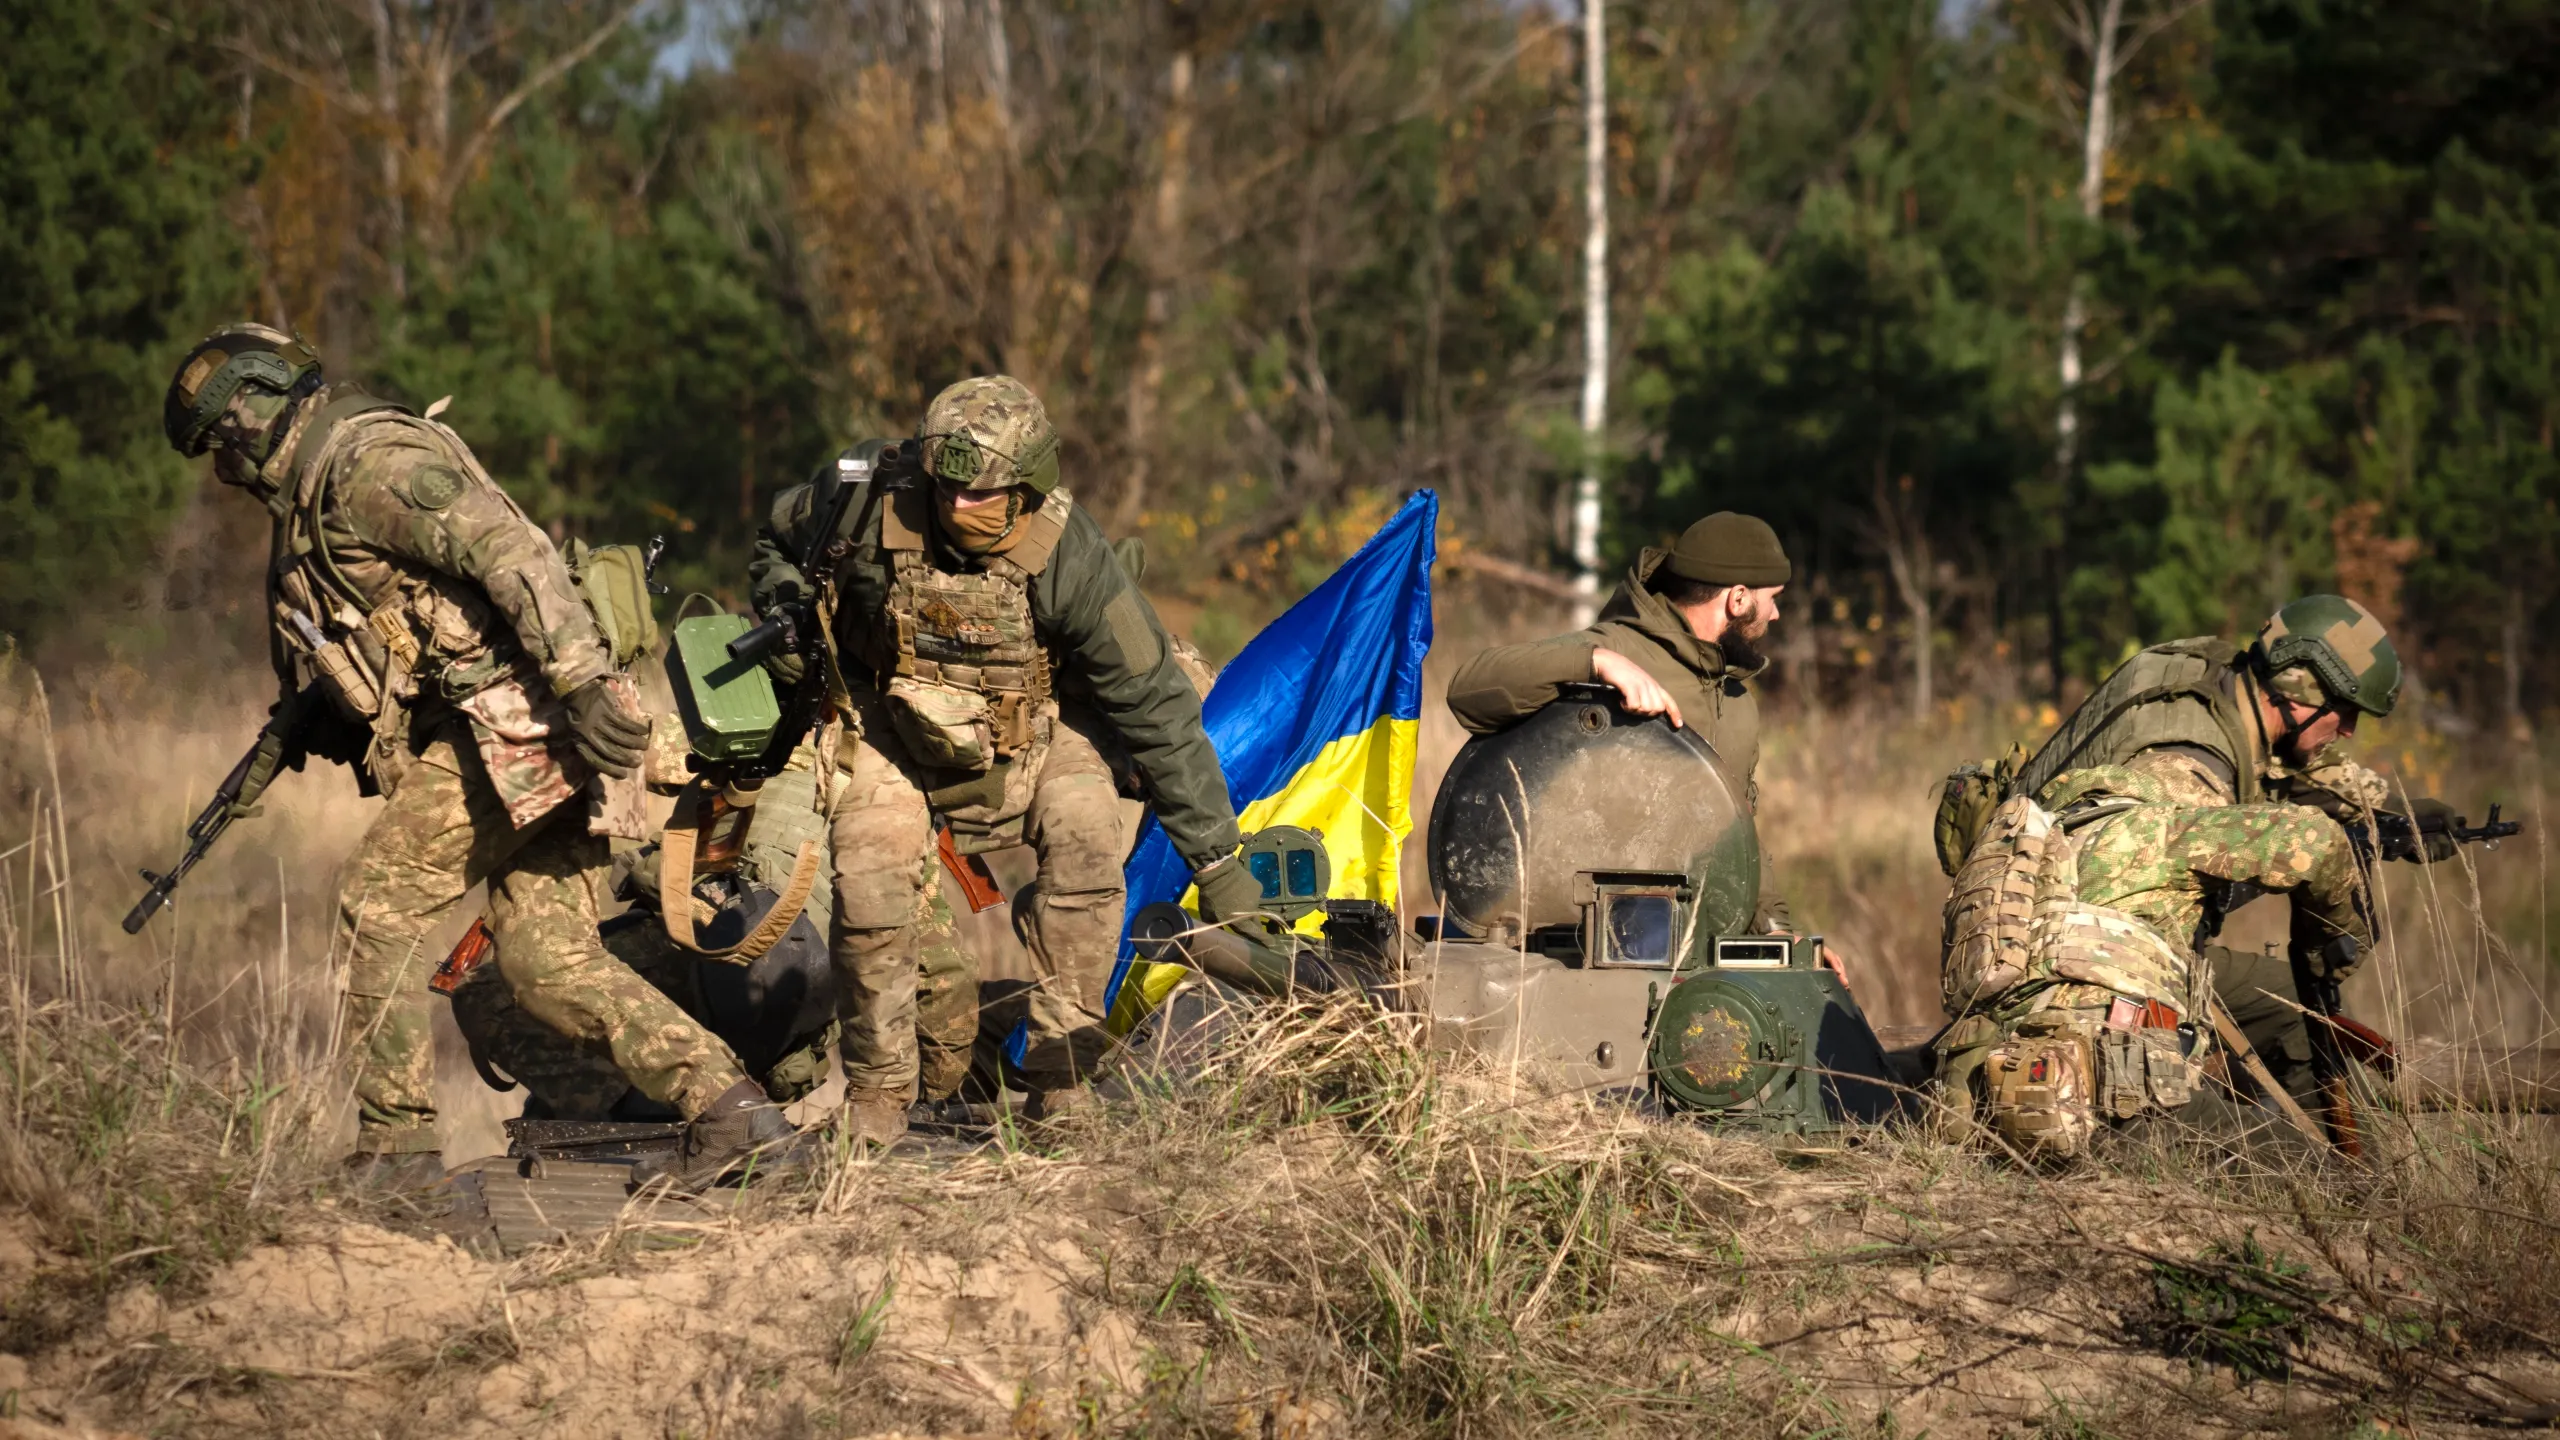 Ukraine Supporters Urge U.S. to Act Boldly in War